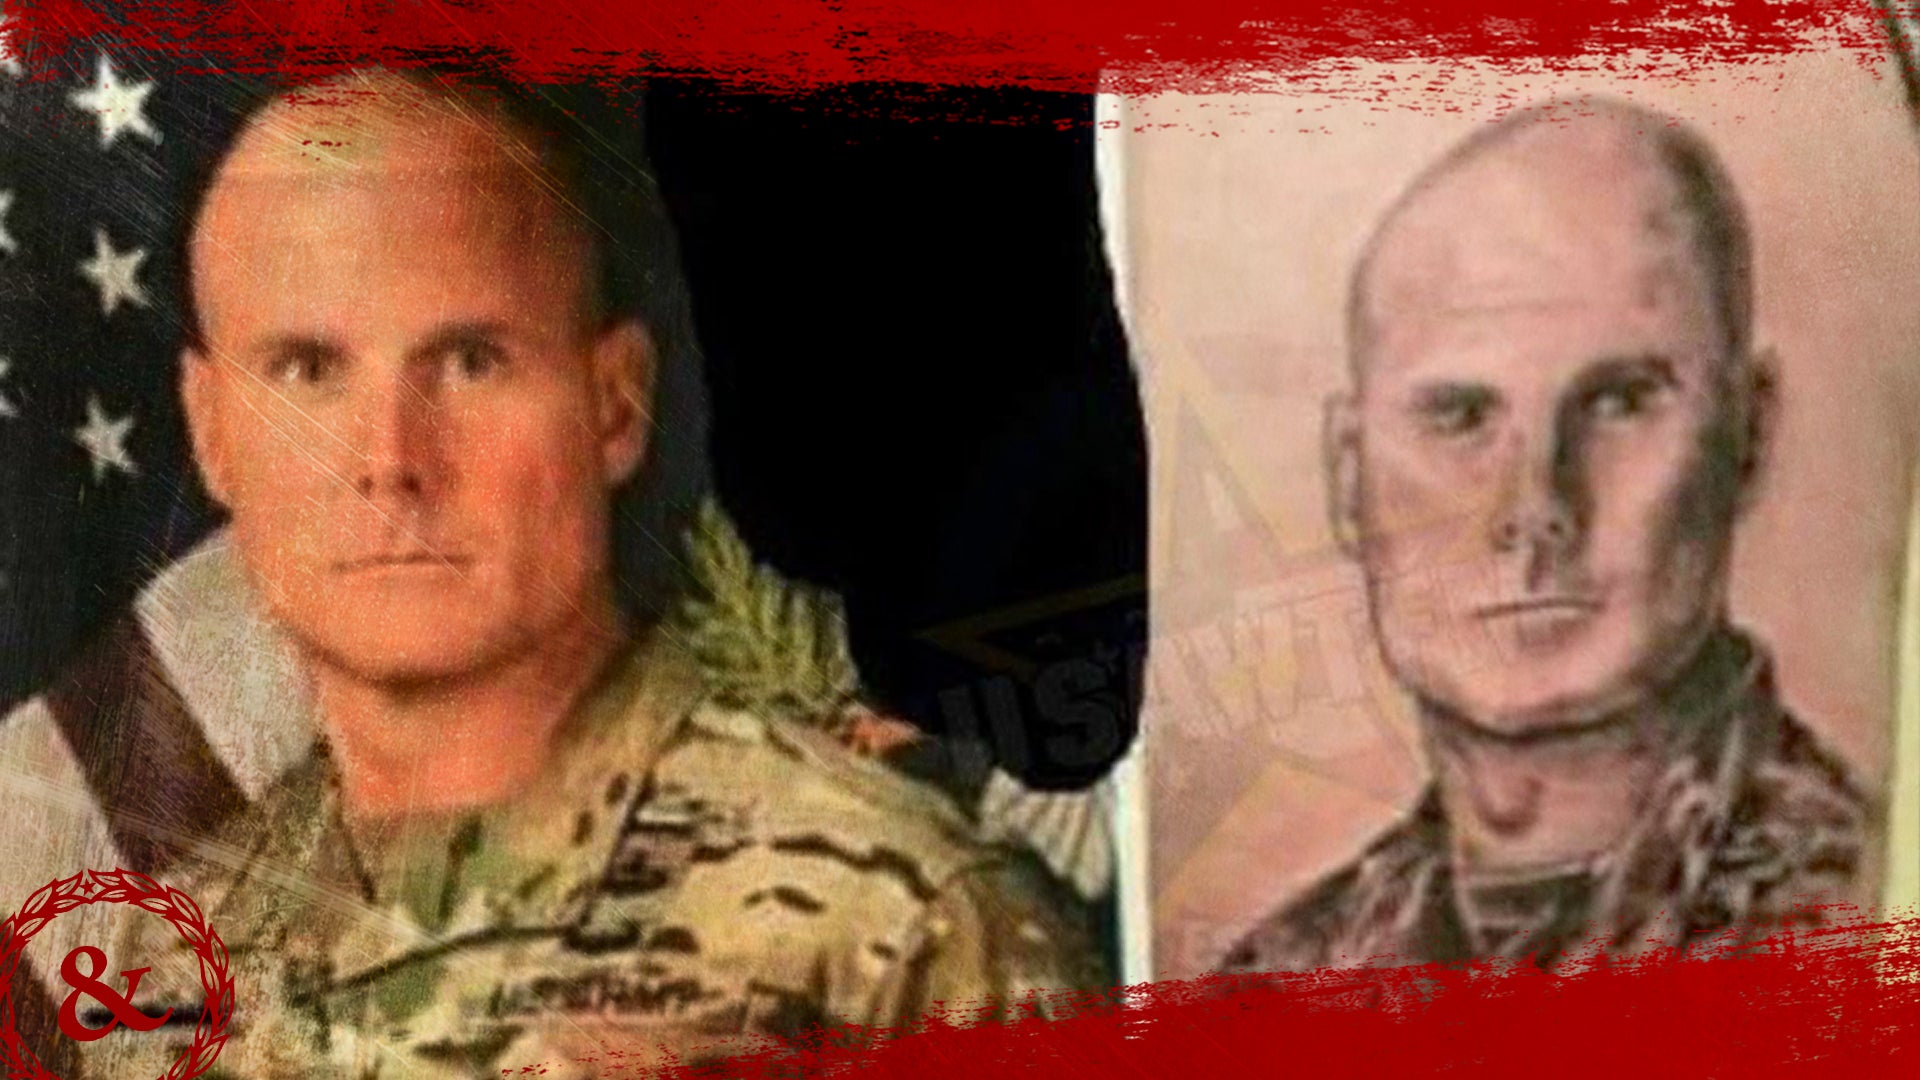 This might be the greatest military tattoo ever seen - Task & Purpose